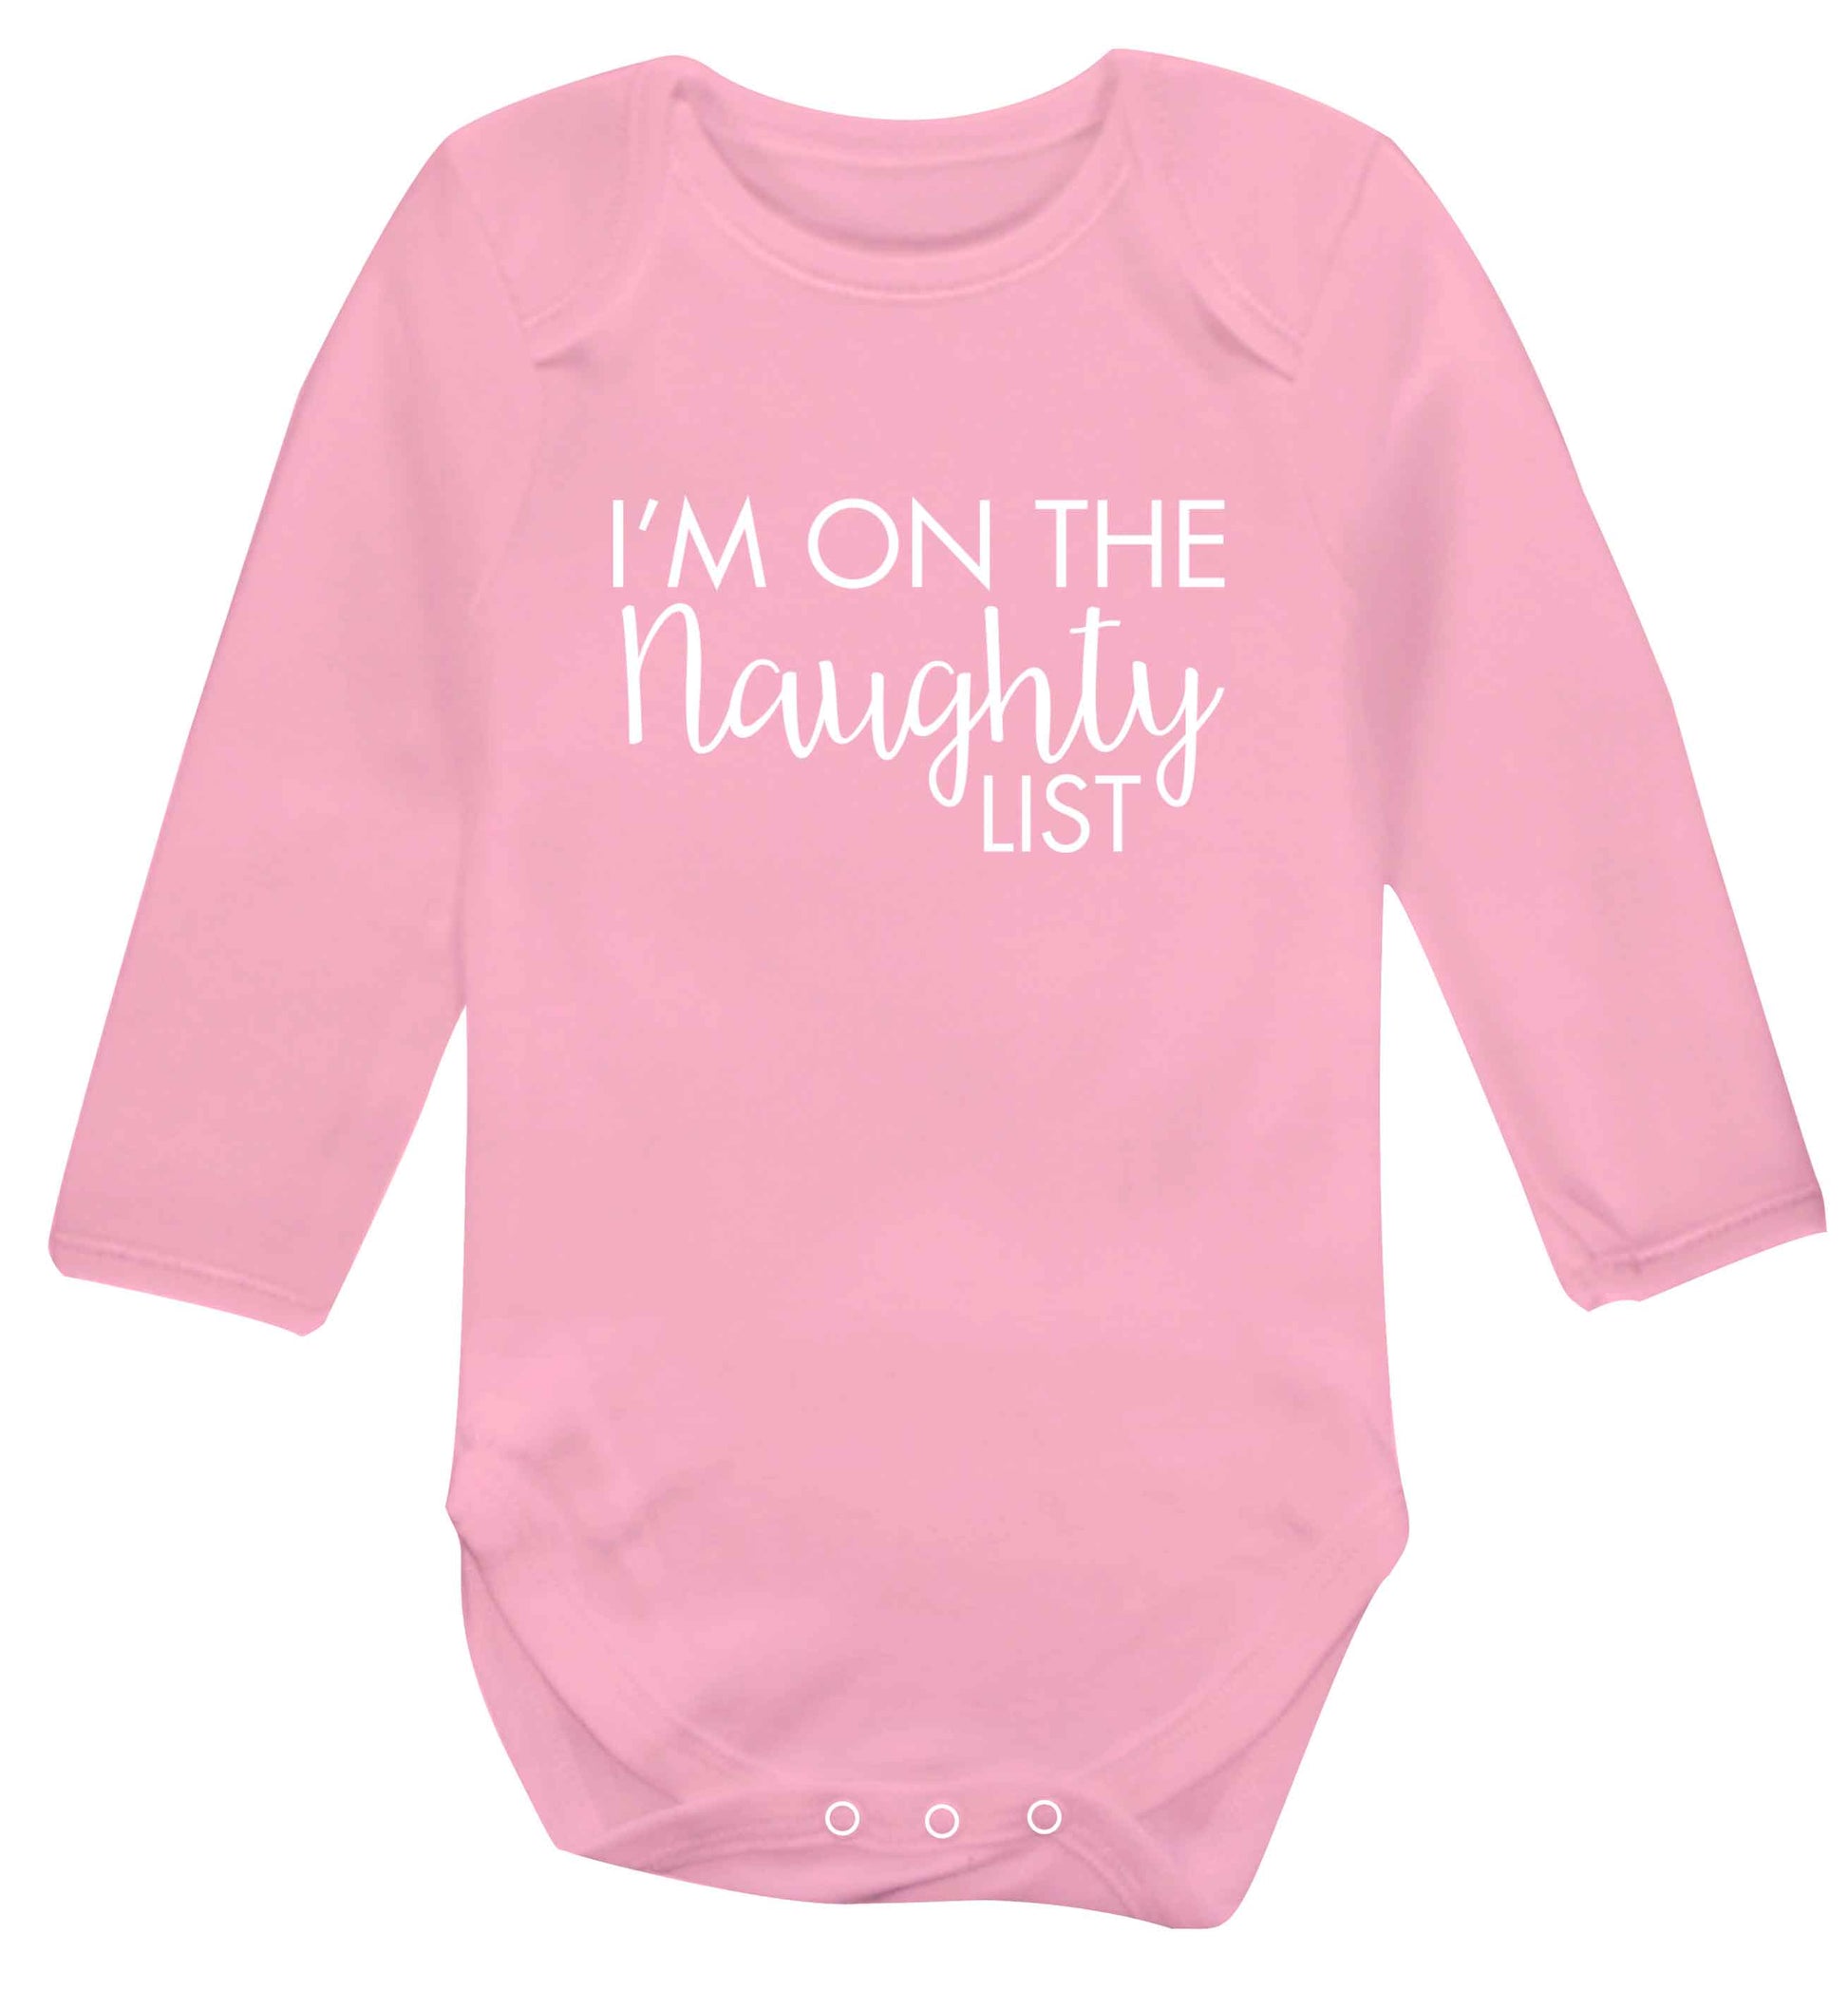 I'm on the naughty list baby vest long sleeved pale pink 6-12 months